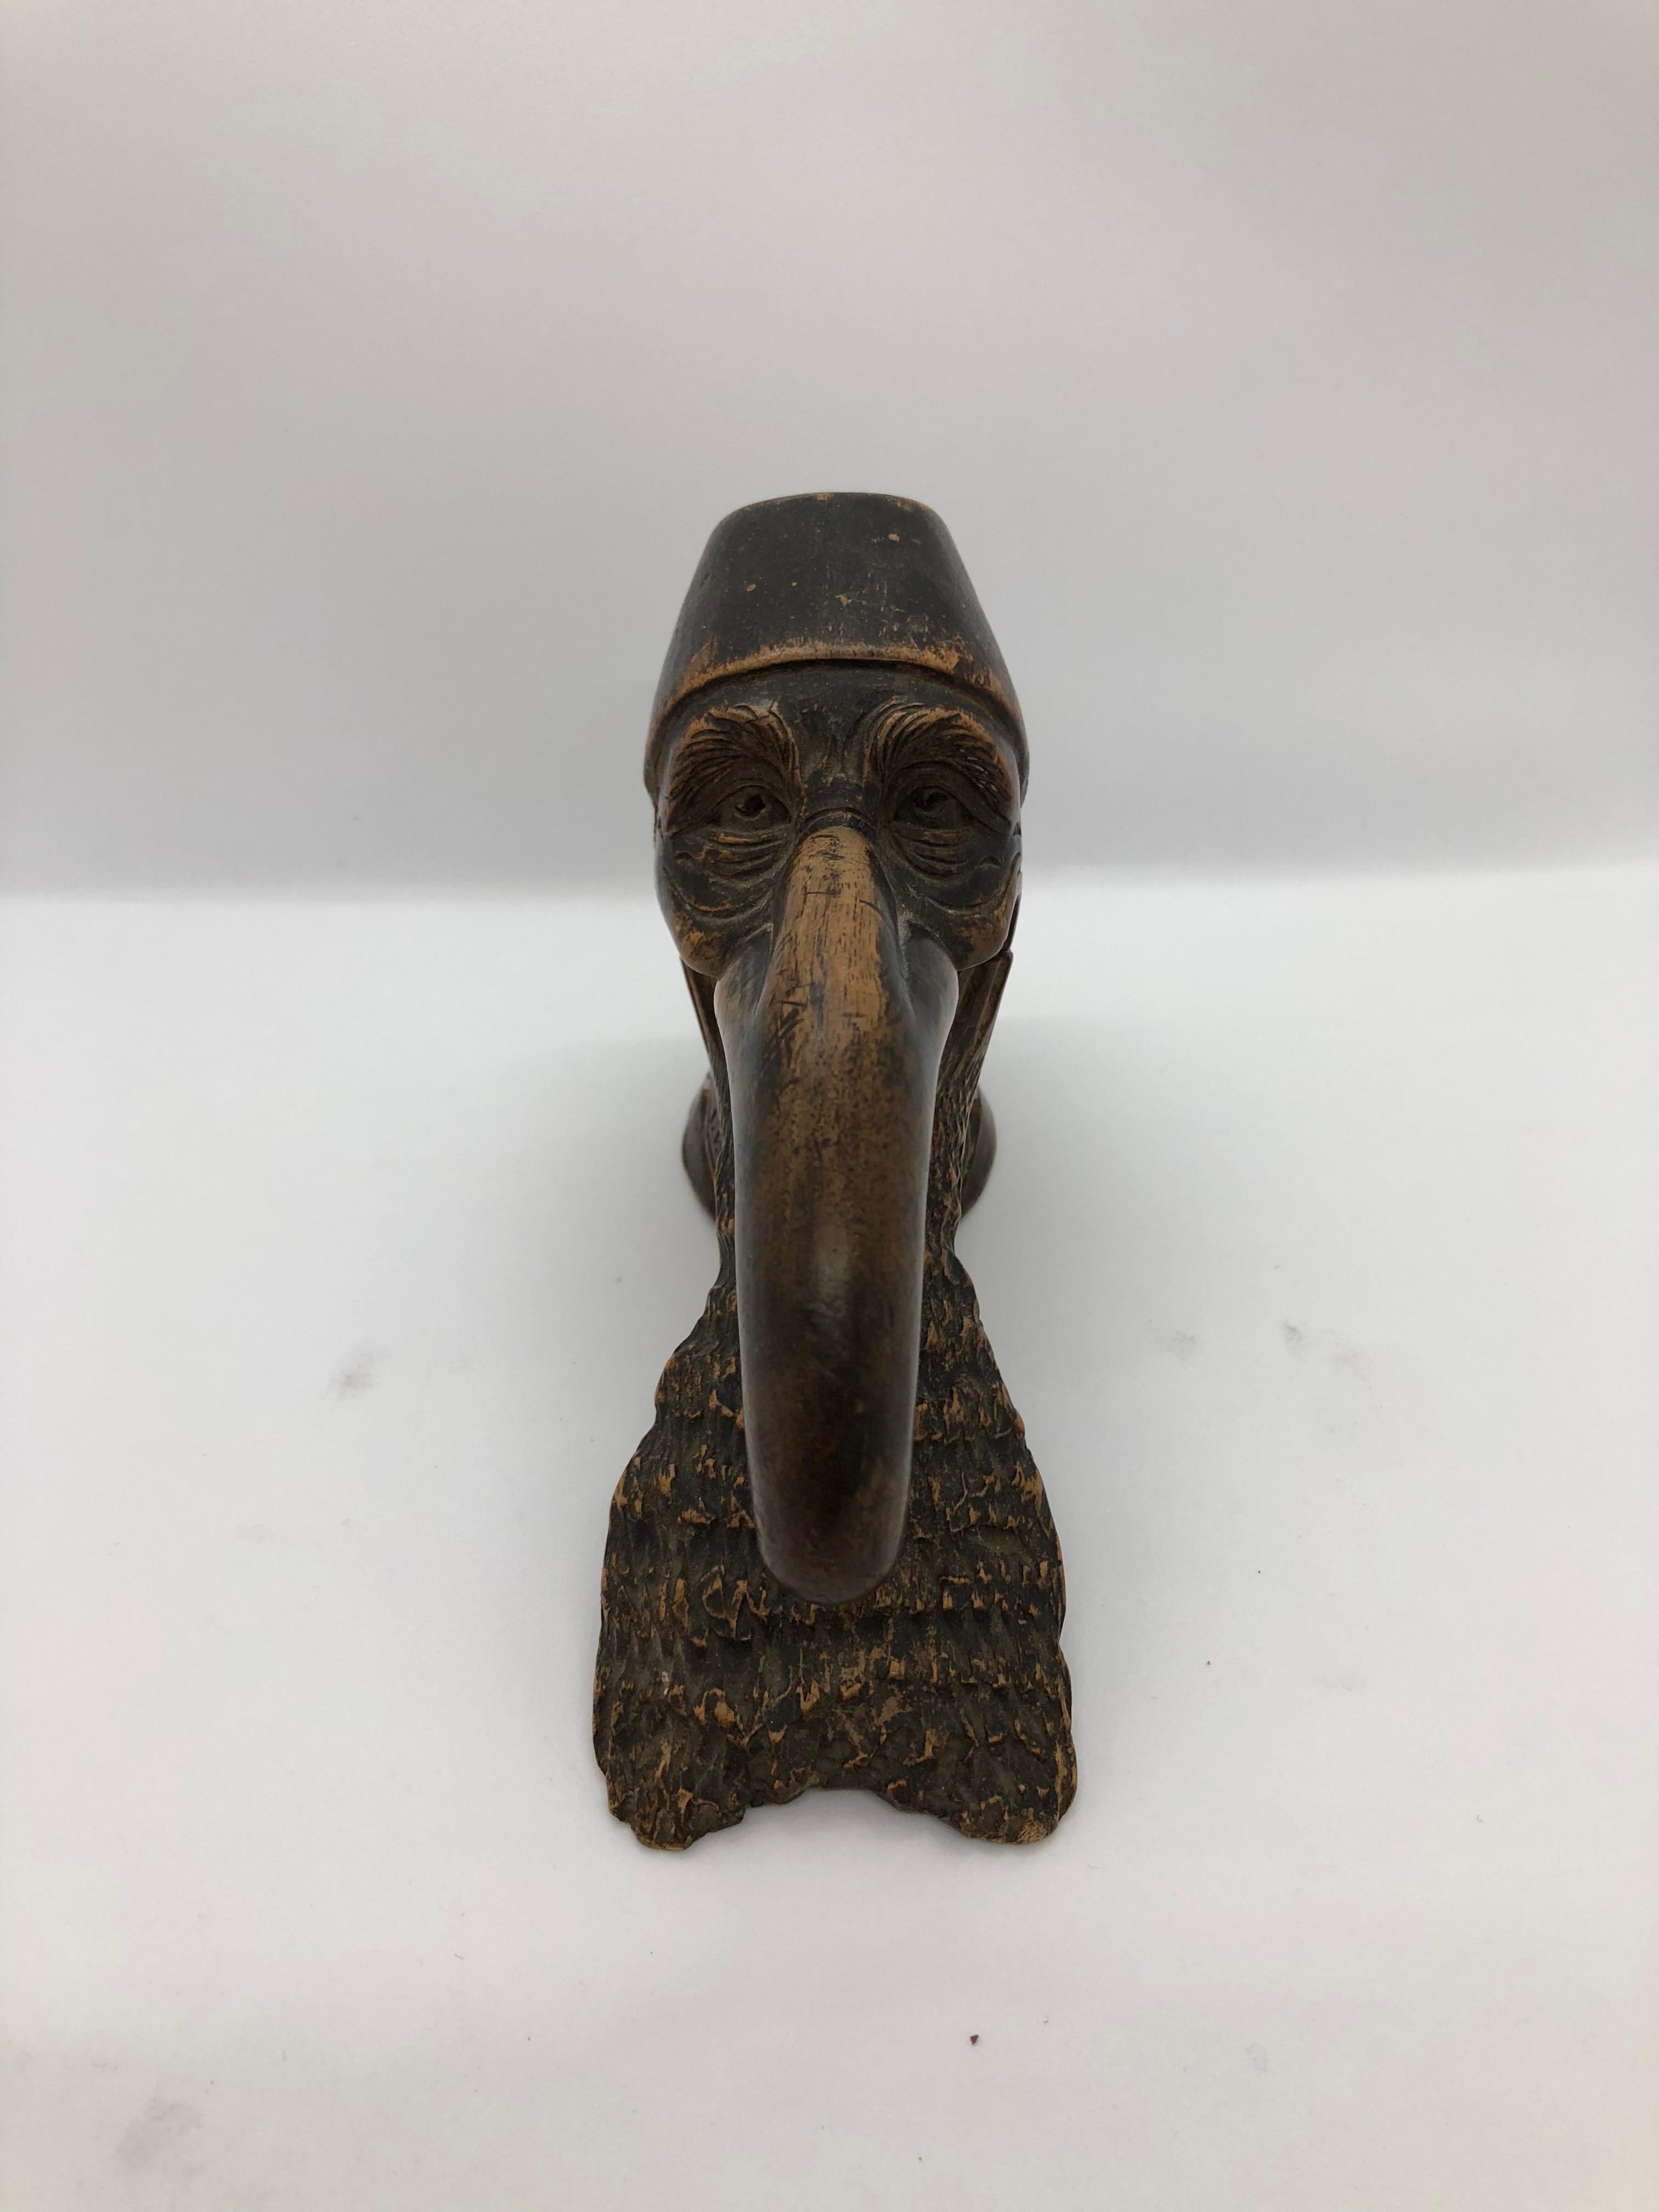 A sculptured wood nutcracker in the shape of a mans head. Very humoristicallly designed and carved. Probably Swiss.
Marked 